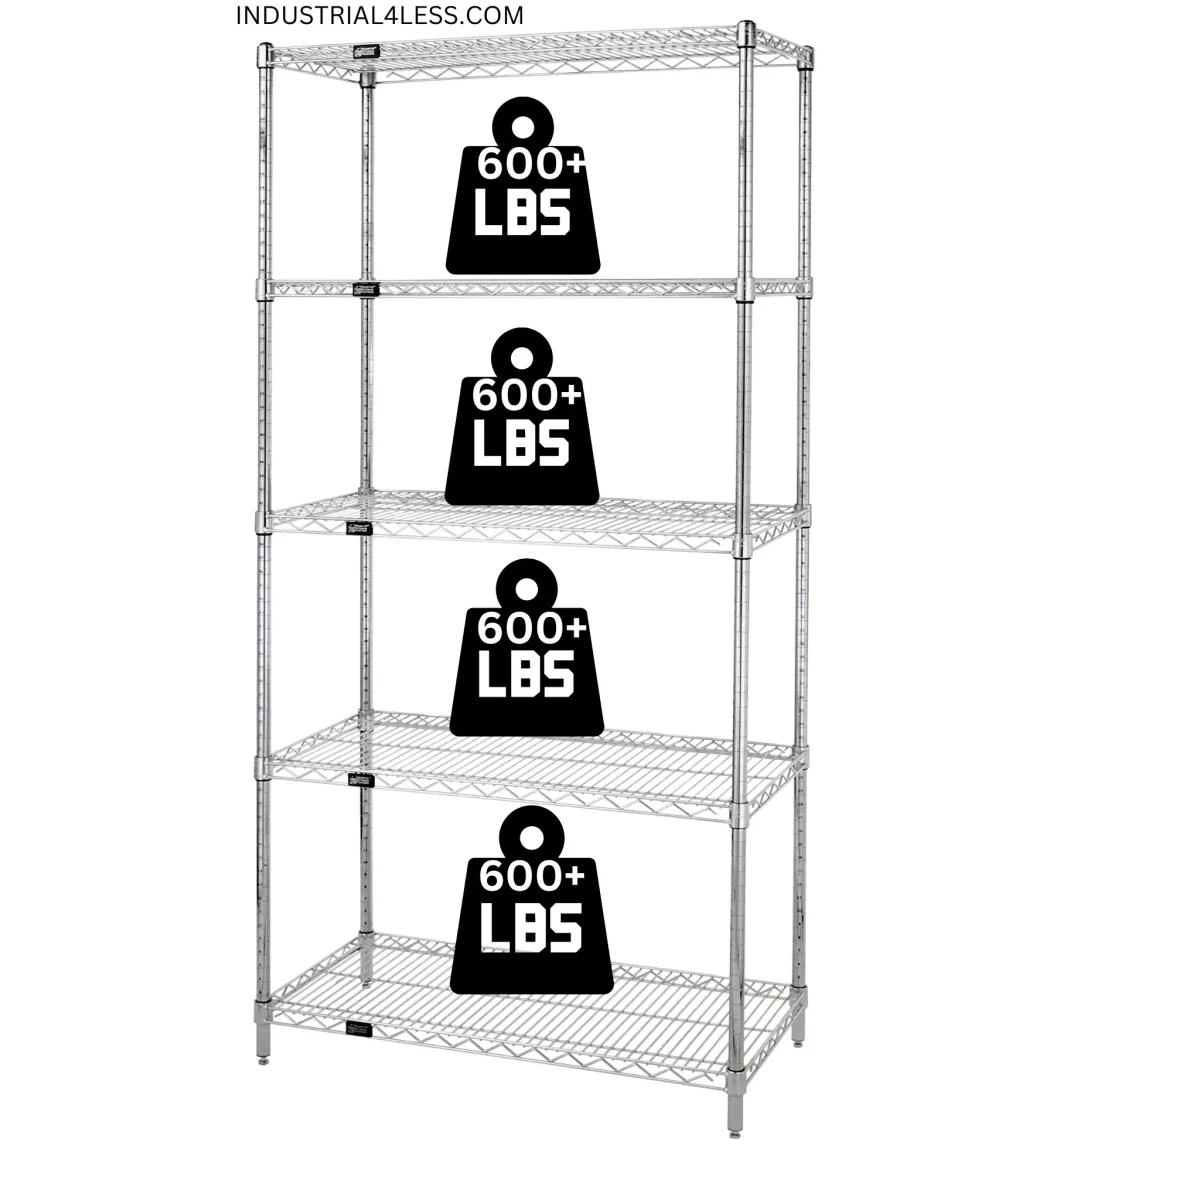 14" x 36" Stainless Steel Wire Shelving Unit - Industrial 4 Less - 14365S-5